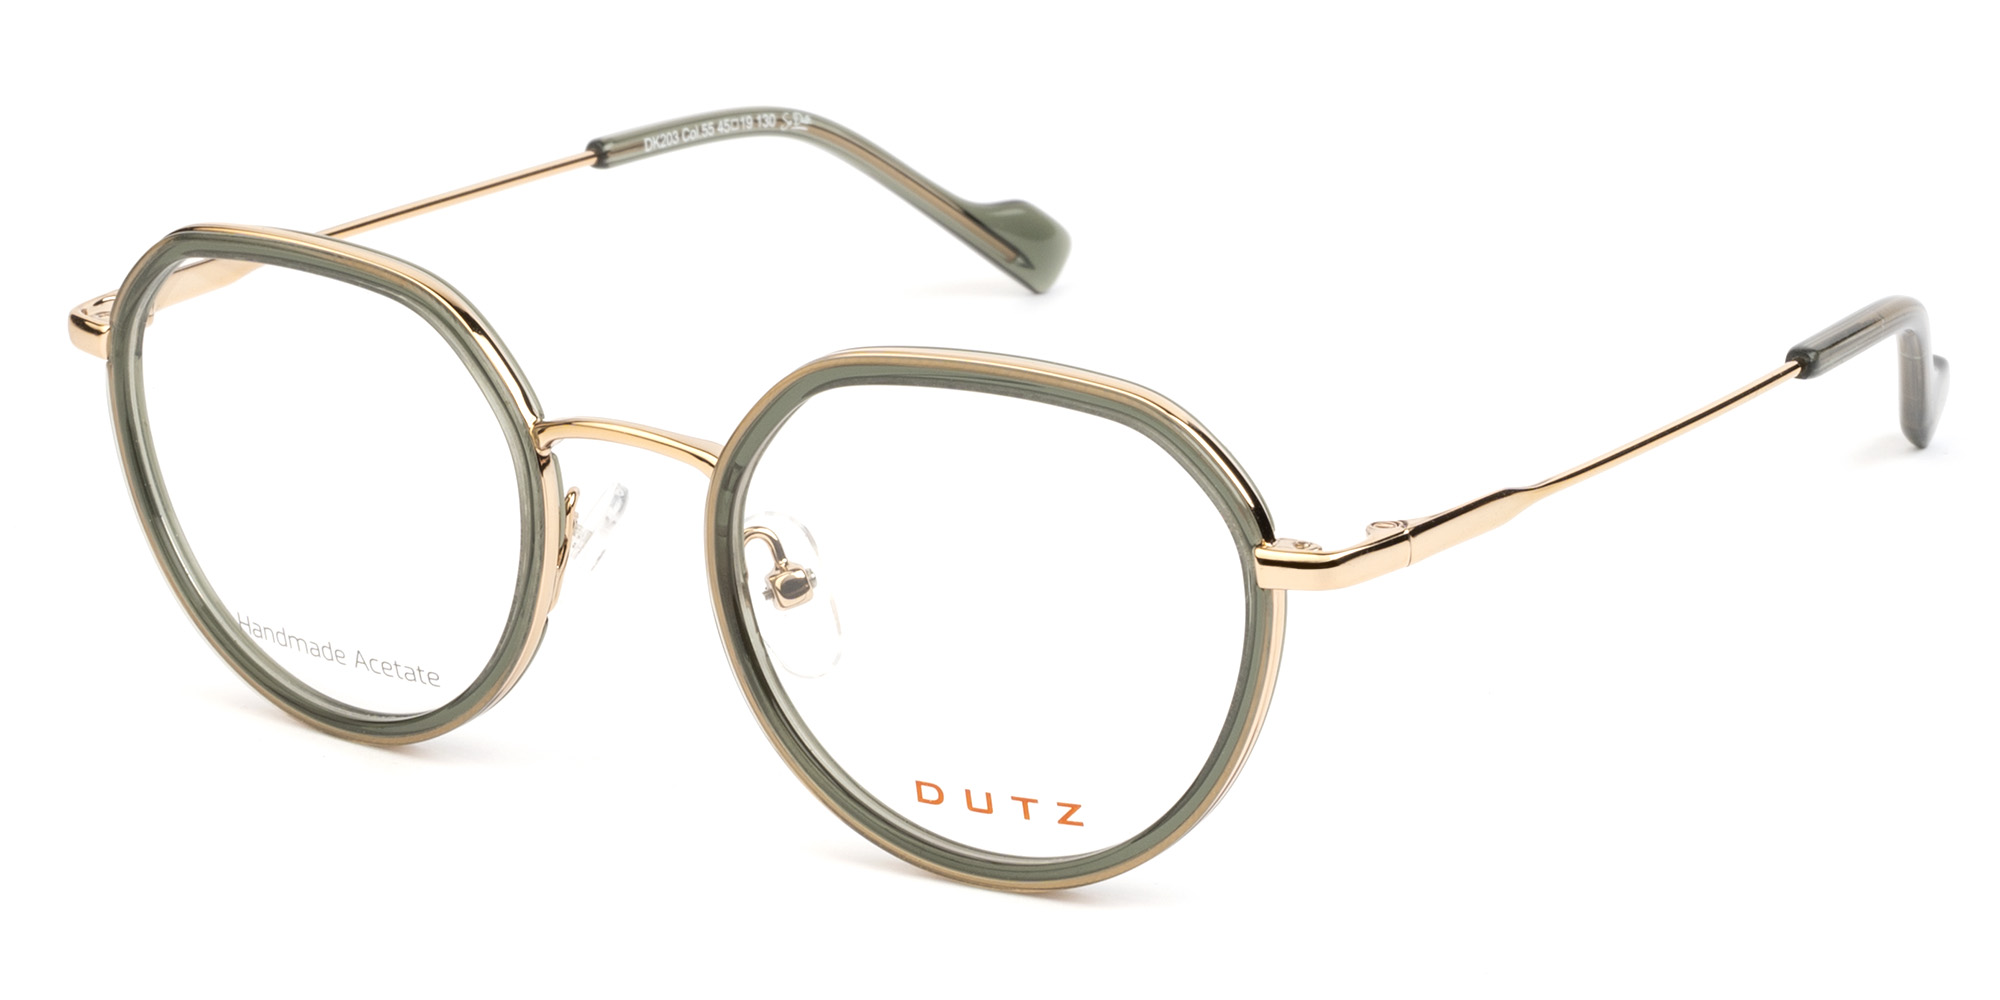 Gold tone metallic frame and temples, combined with green color acetate and matching color acetate temple tips